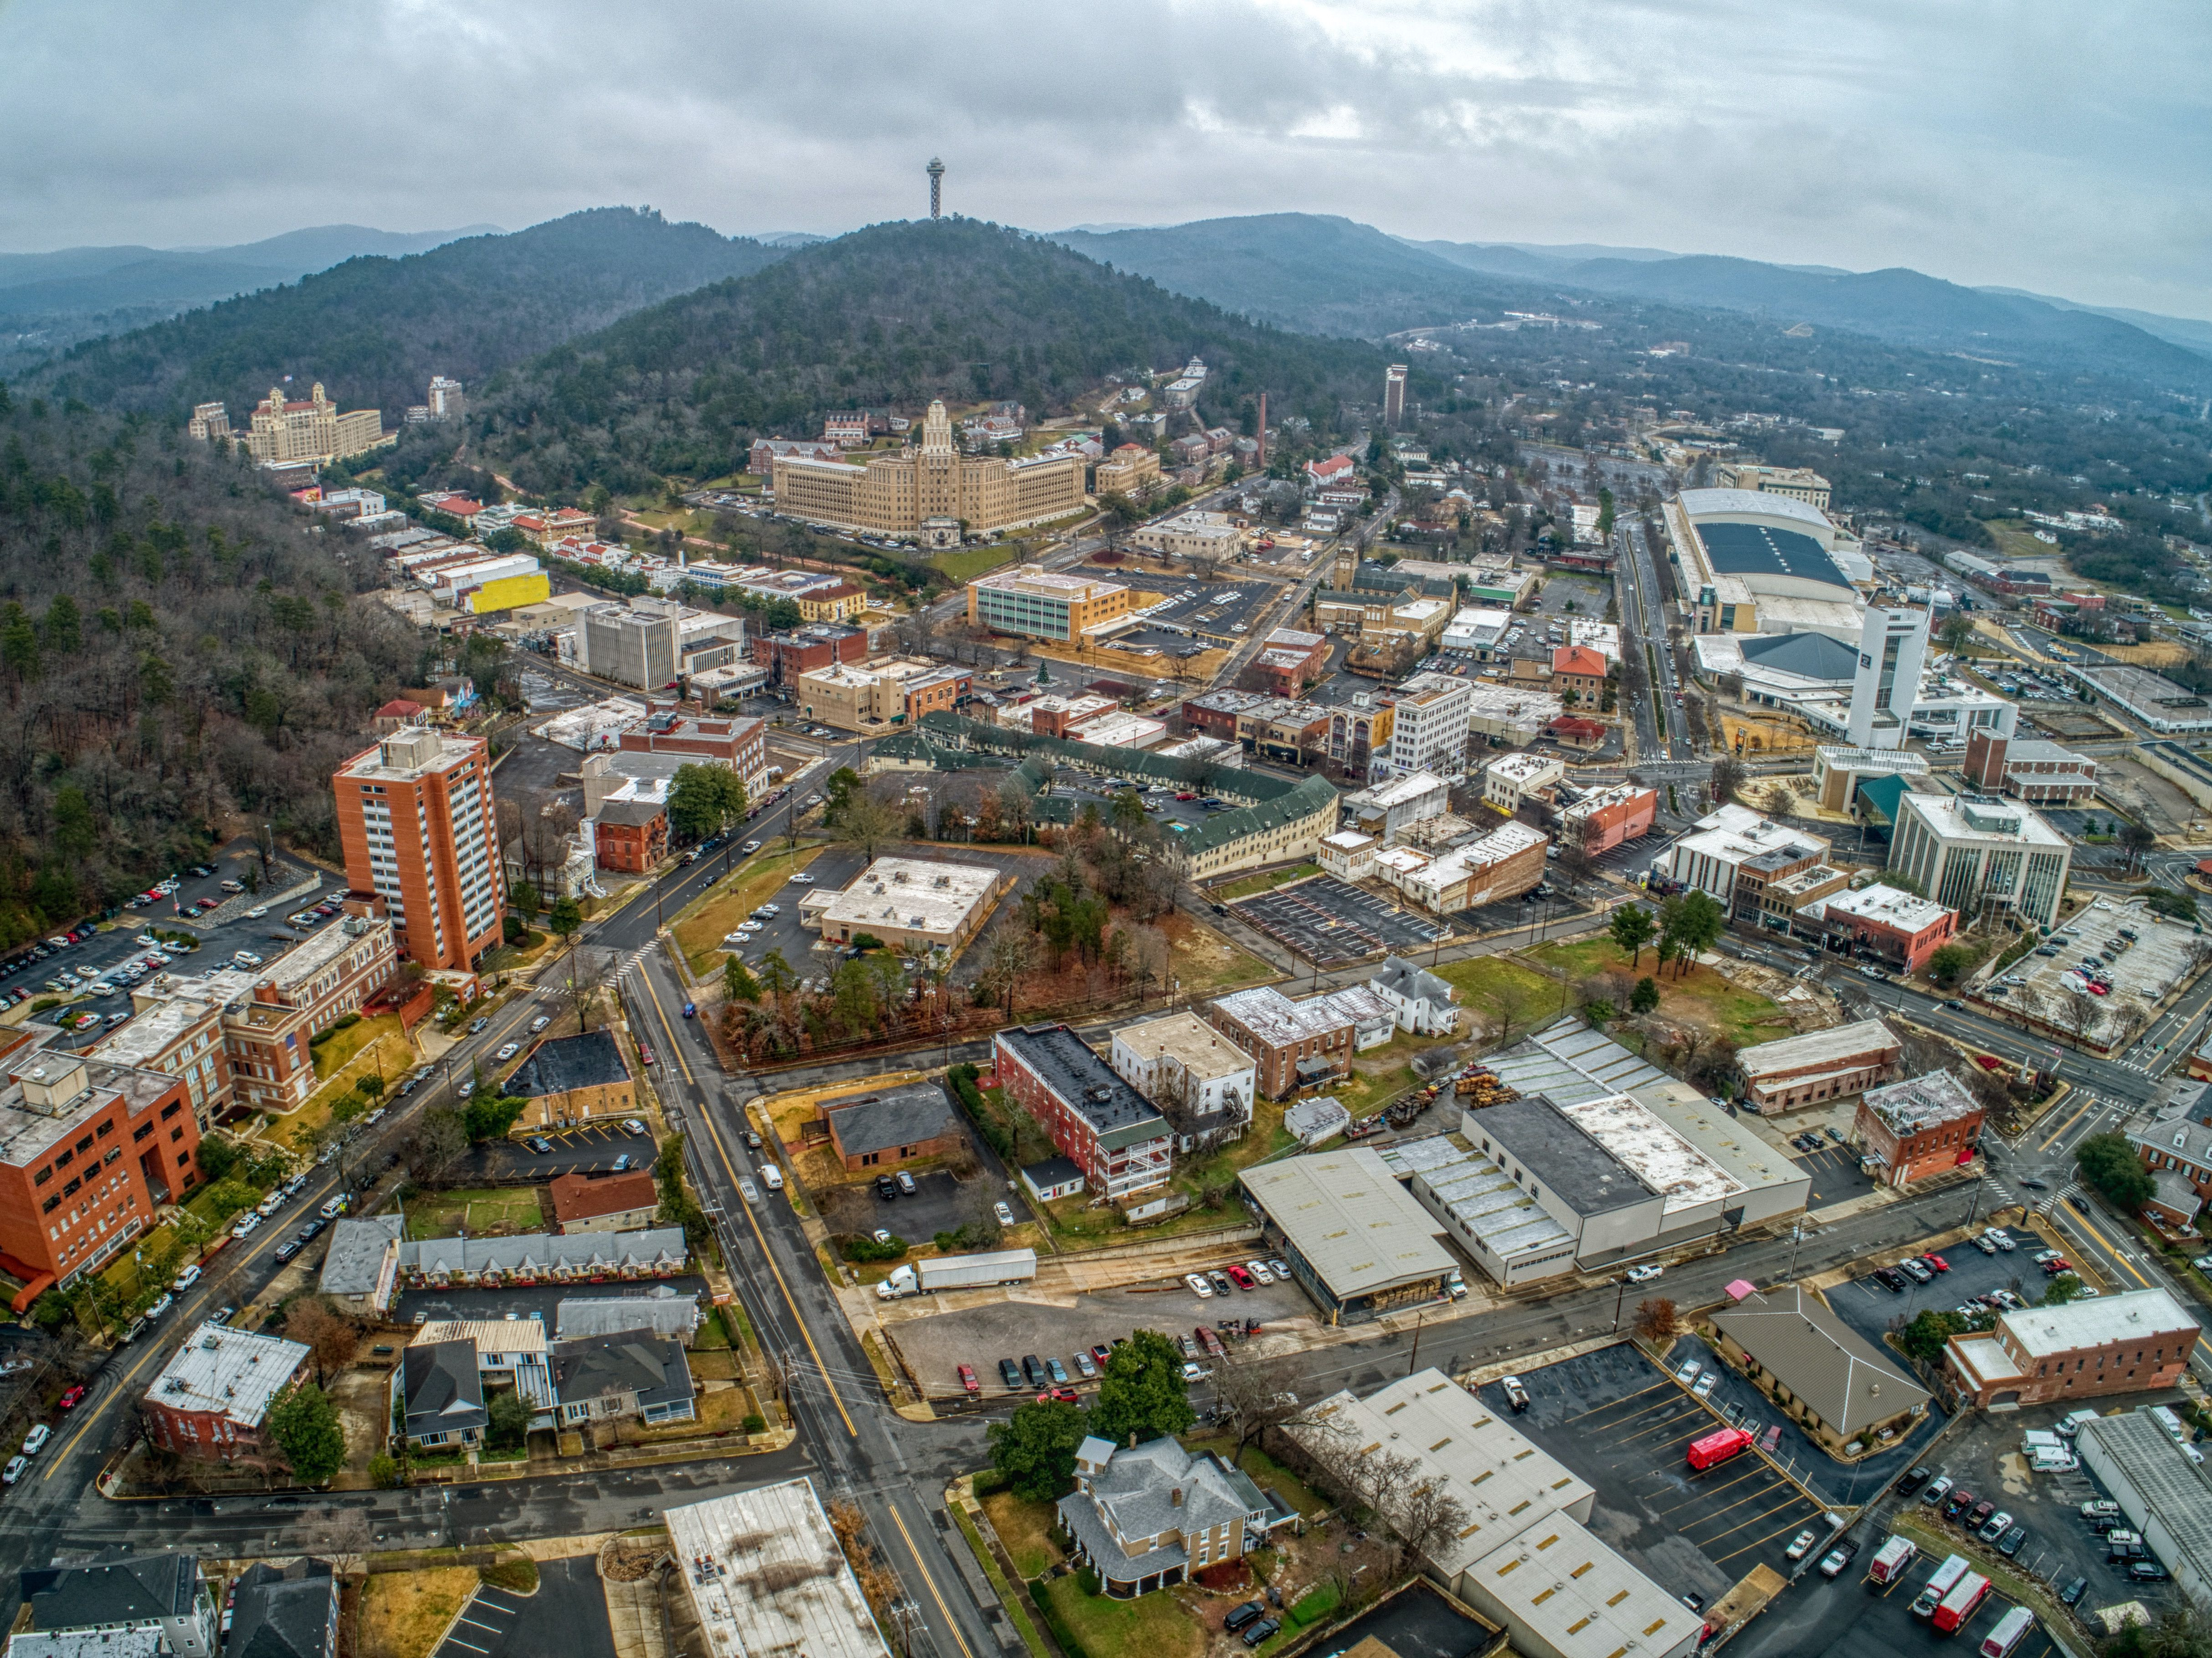 Aerial view of downtown Hot Springs, Arkansas |  Source: Shutterstock